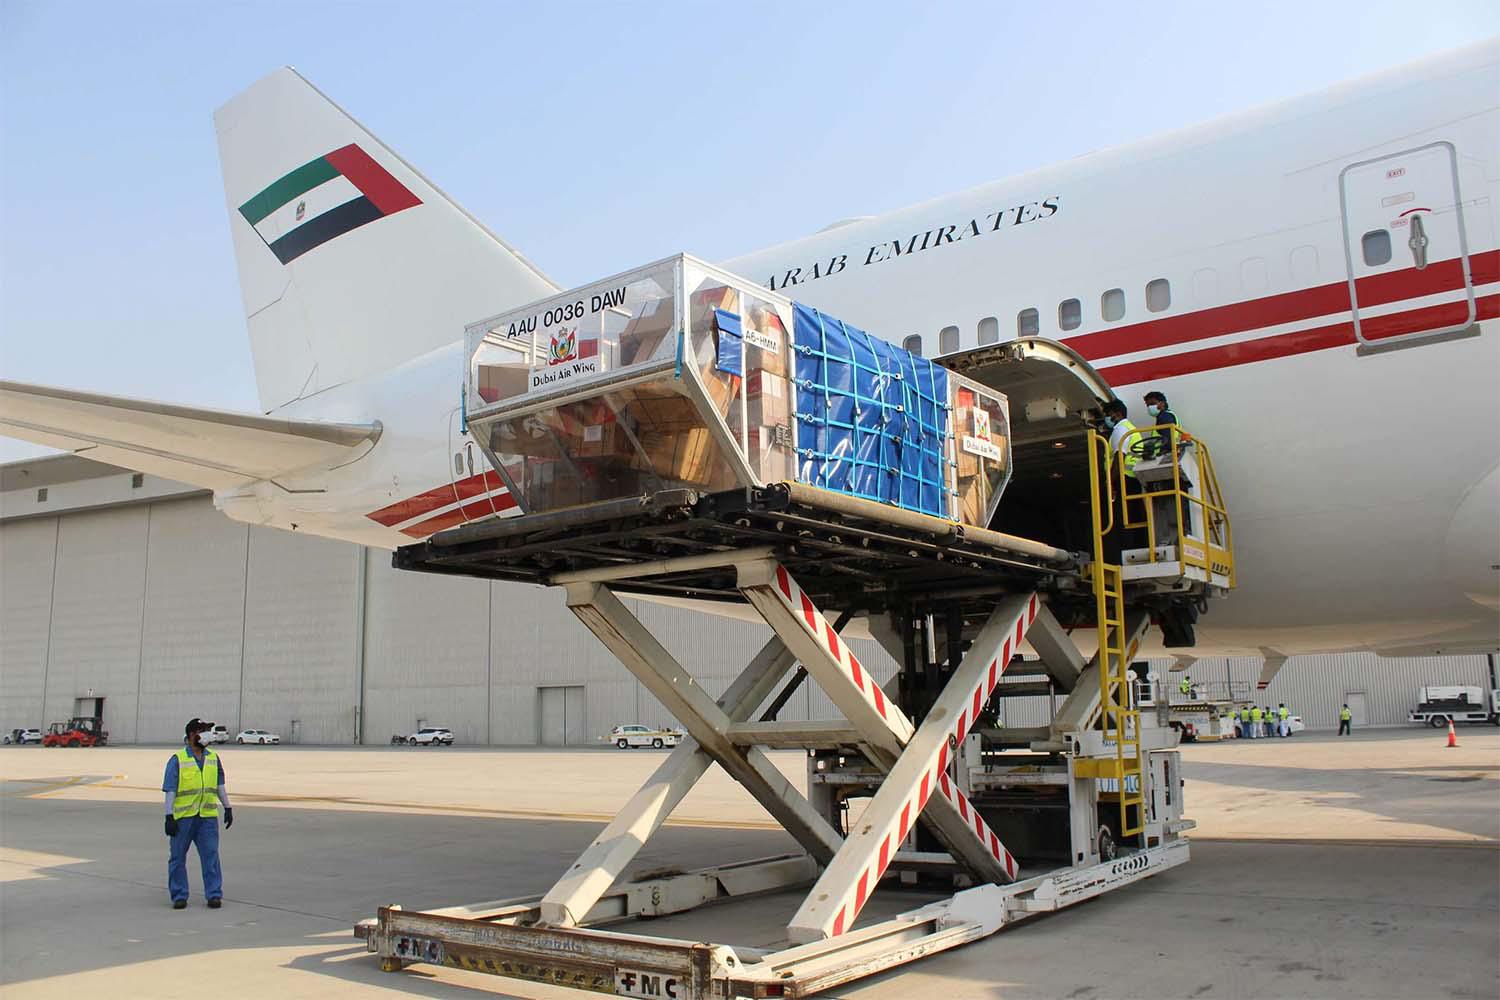 The UAE rushed to help Lebanon with tonnes of medical supplies